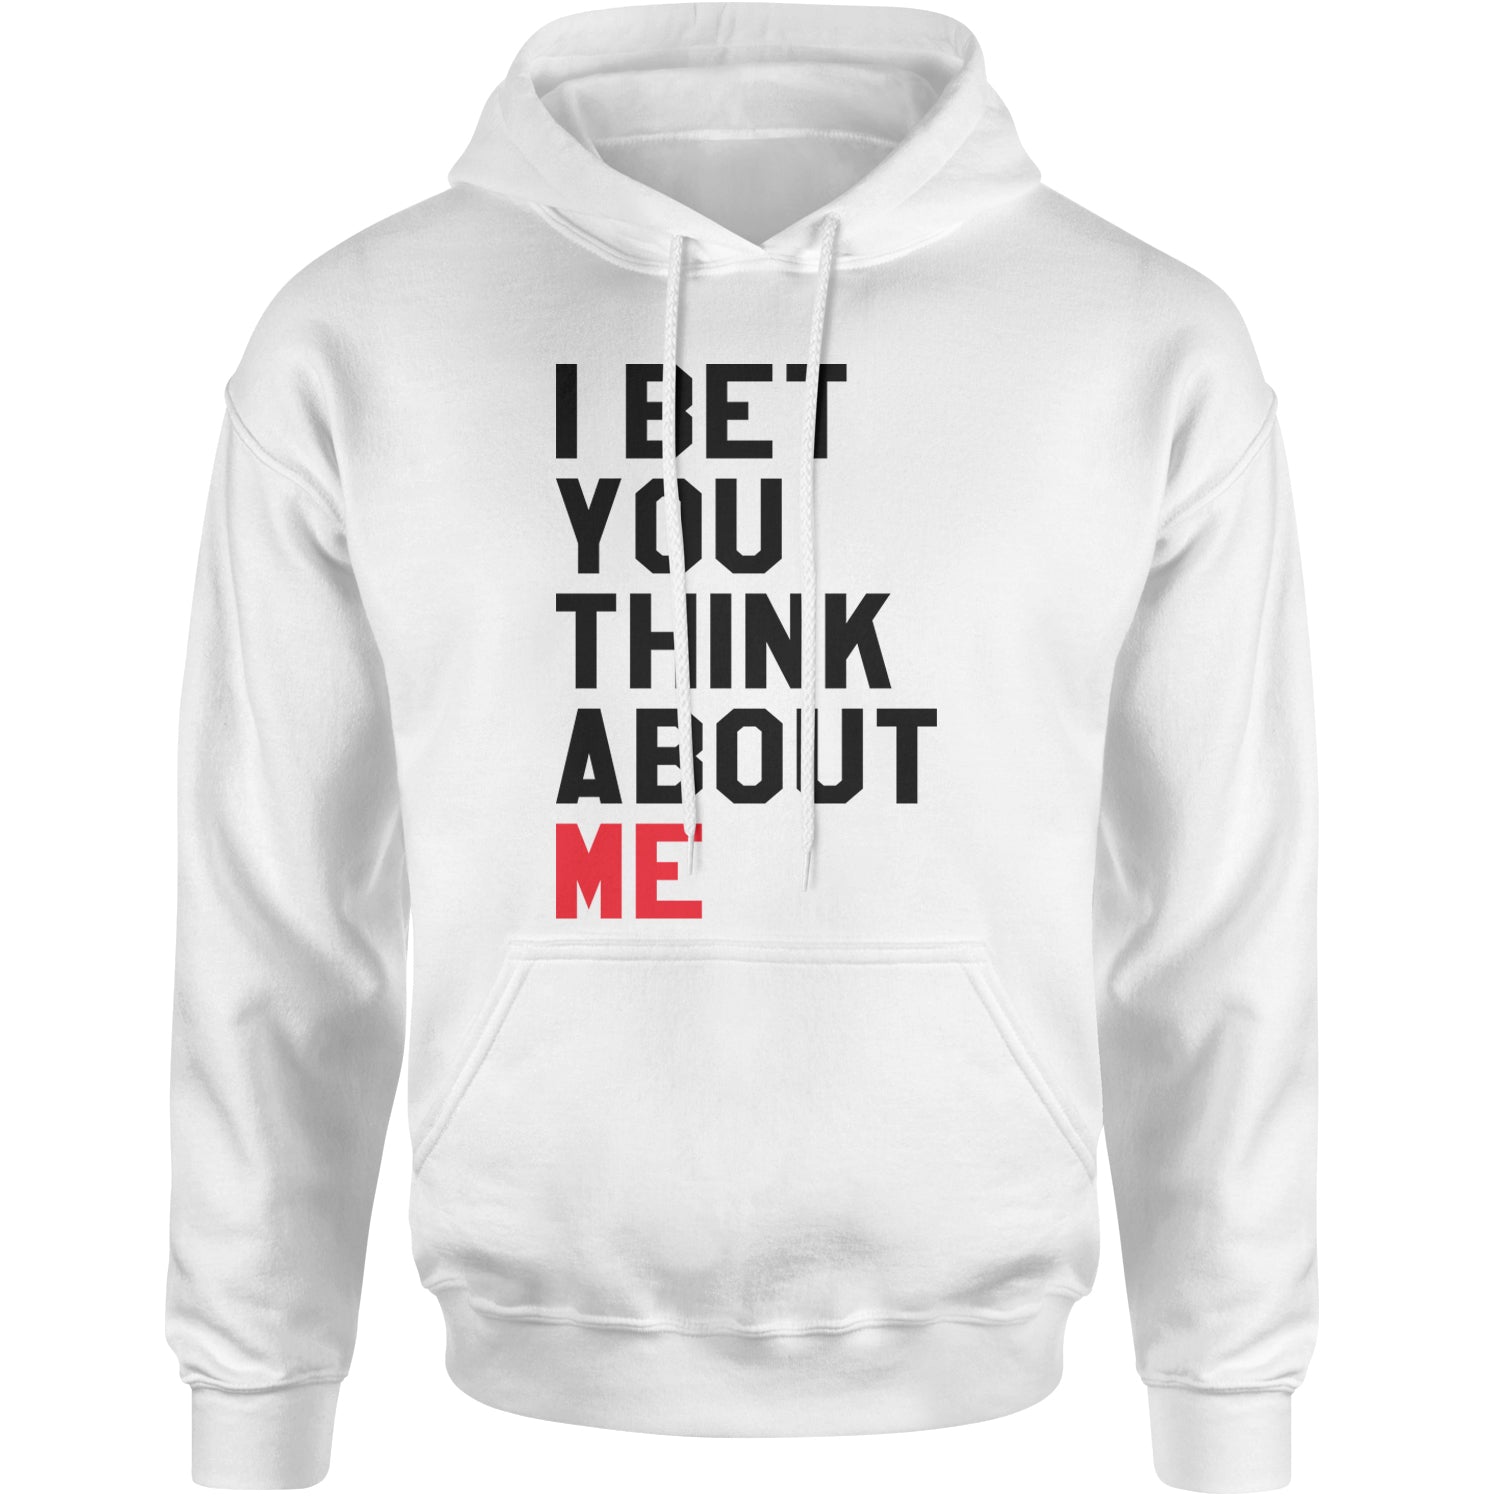 I Bet You Think About Me New TTPD Era Adult Hoodie Sweatshirt